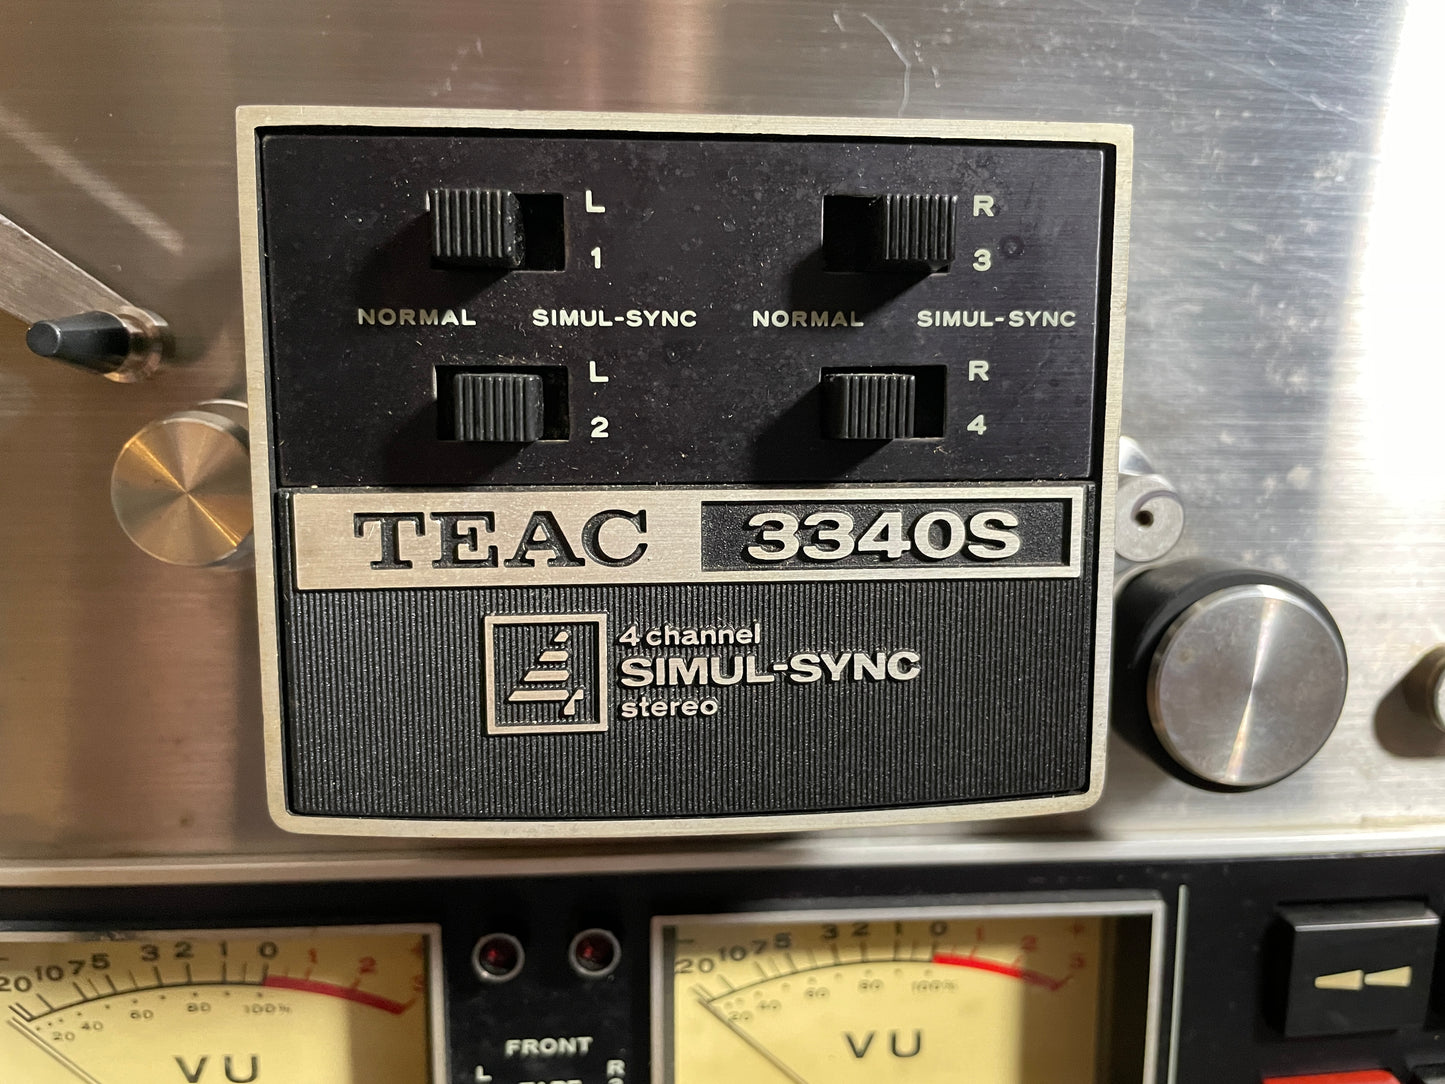 Vintage TEAC 3340S Pro-Serviced 4-Channel Simul-Sync Reel-To-Reel